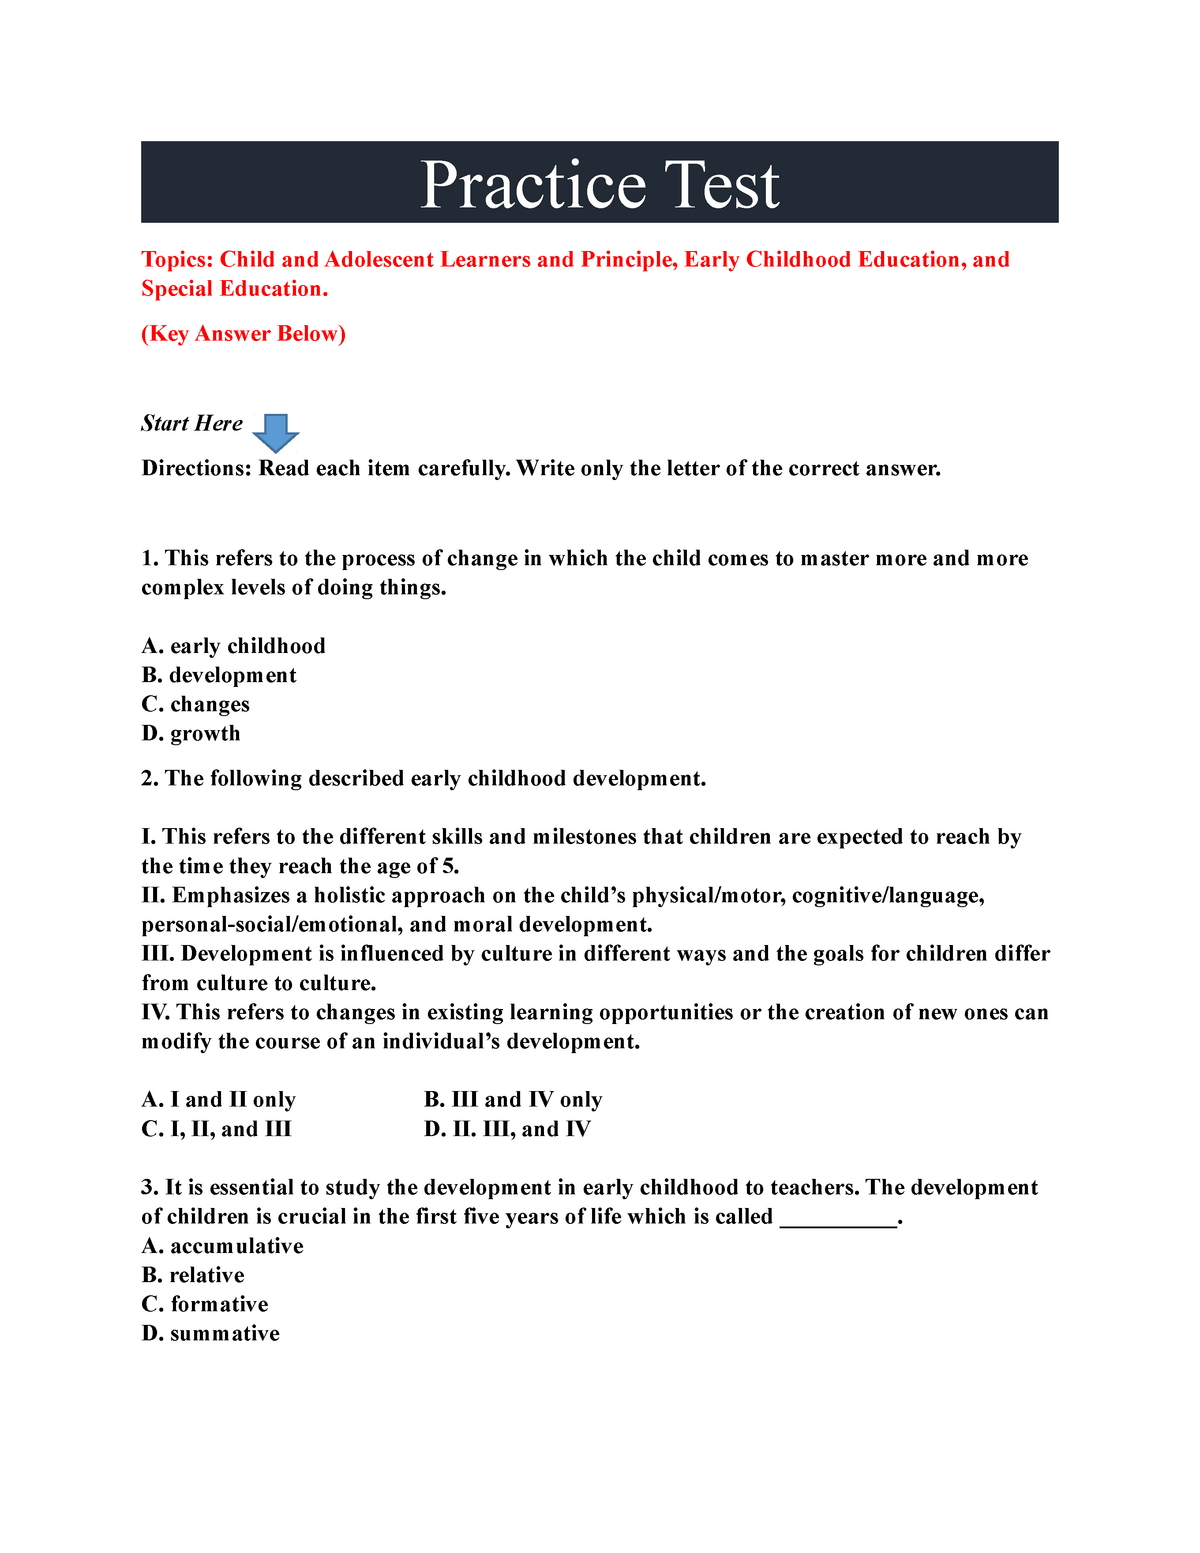 235-item Practice test on Education - Practice Test Topics: Child and ...